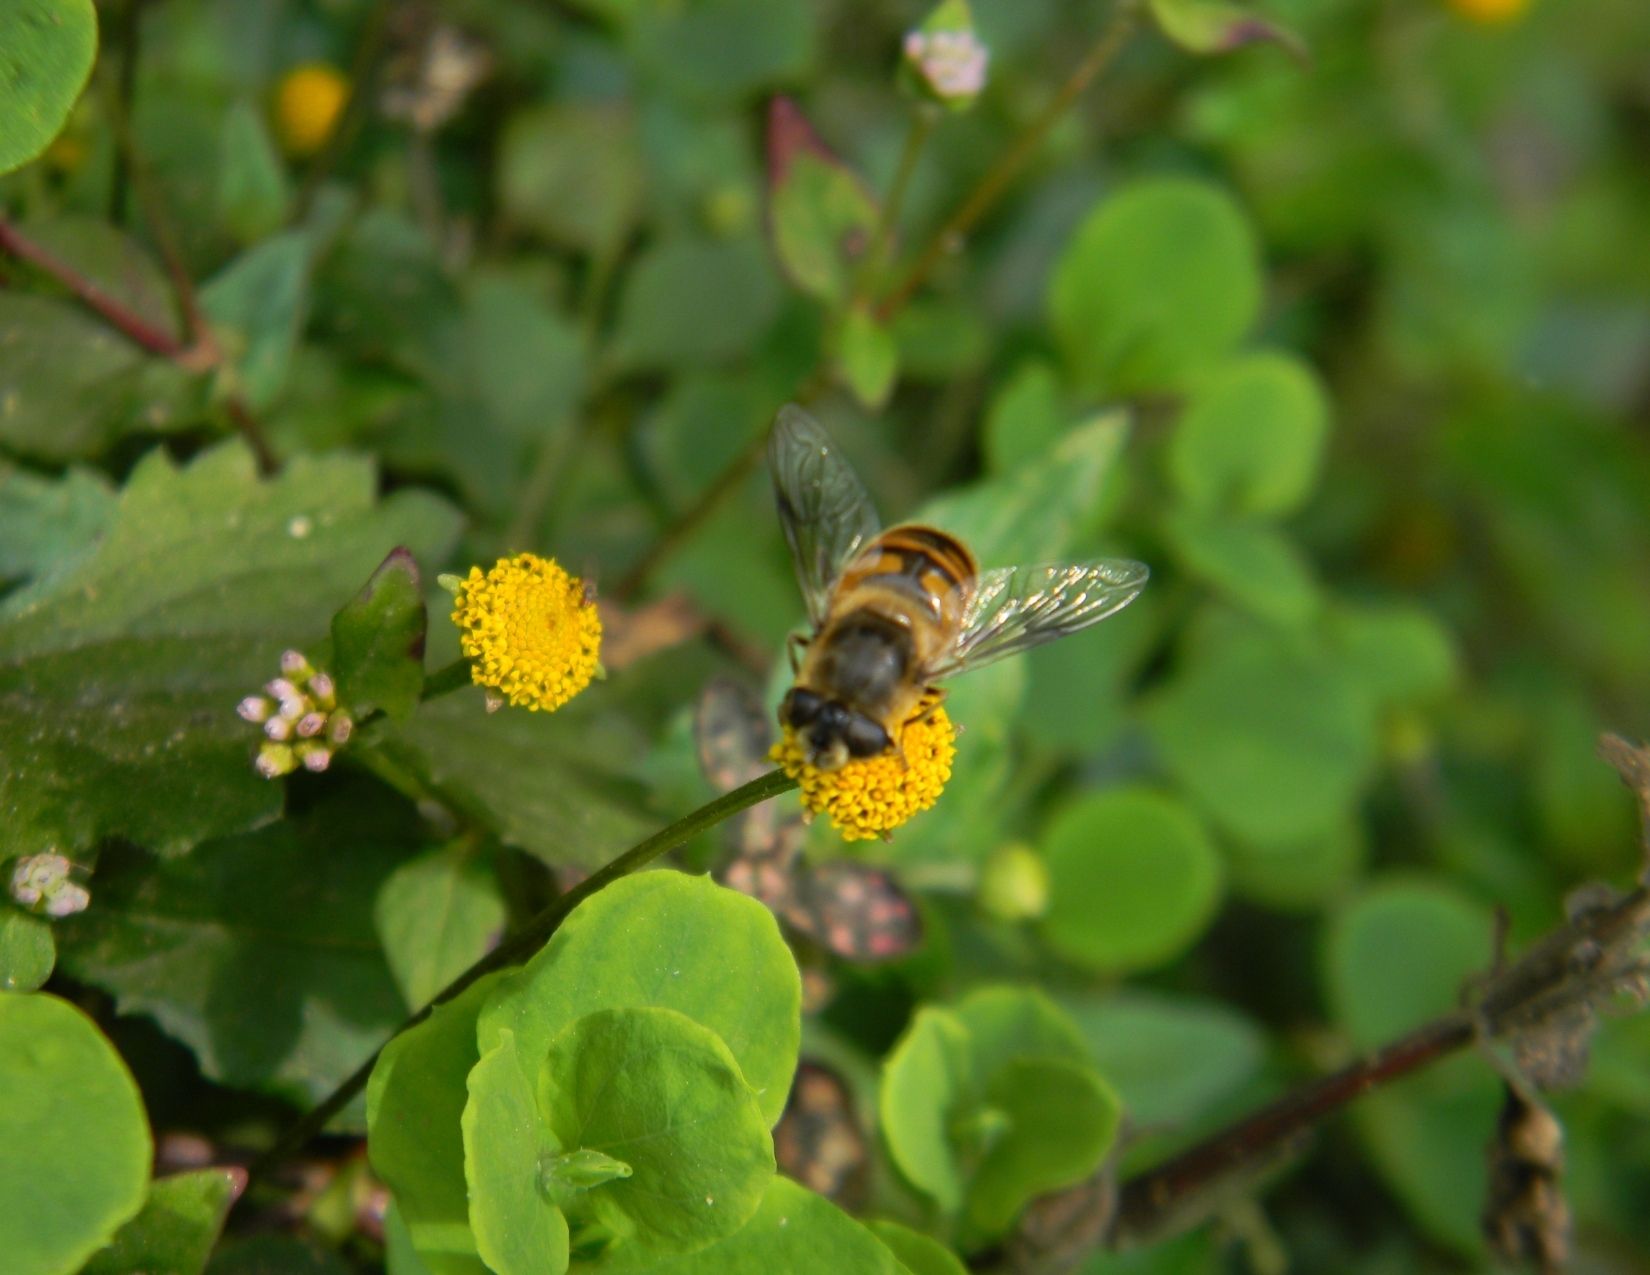 Read more about the article The Bee Effect: Bees’ role as pollinators, producers of a superfood, and the impact of climate change